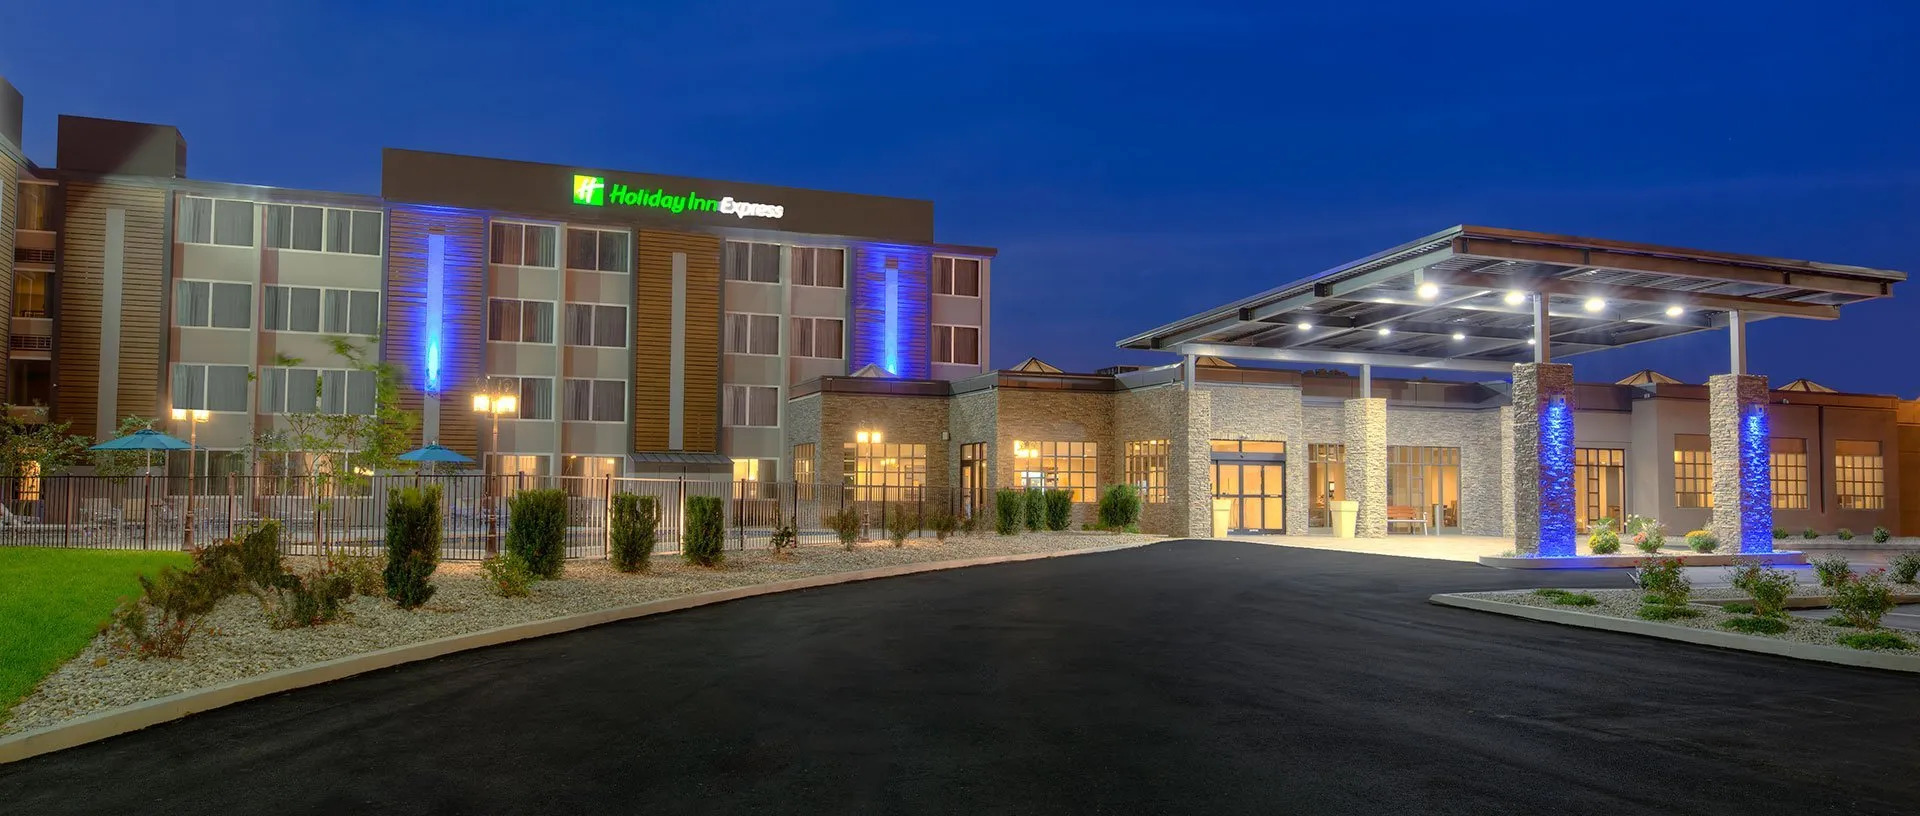 Photo of Home2 Suites by Hilton Clarksville Louisville North, Clarksville, IN